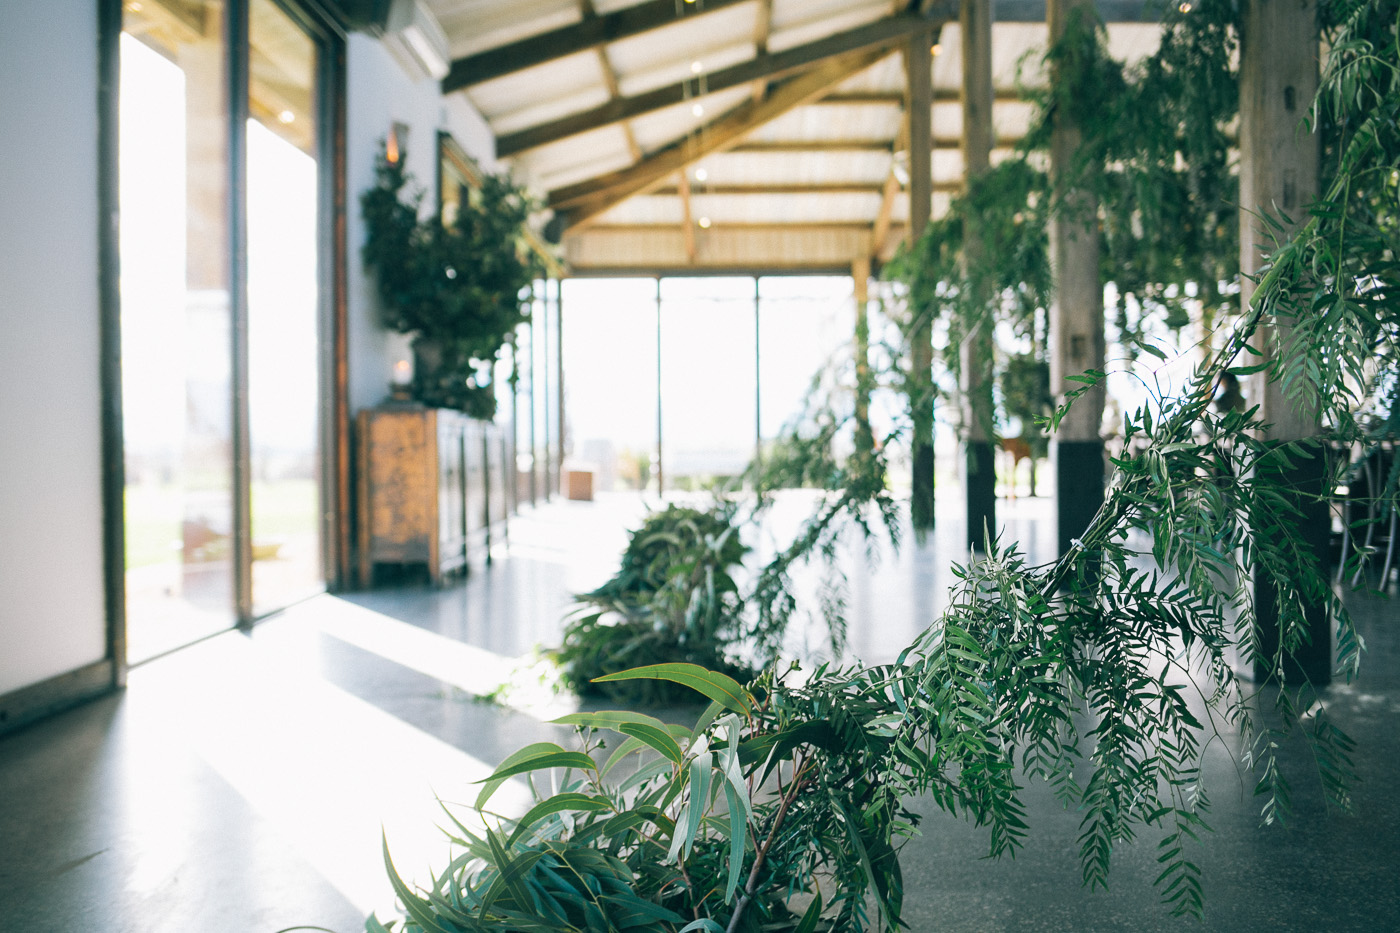 a stunning wedding reception draped in greenery | design by the style co via coco kelley